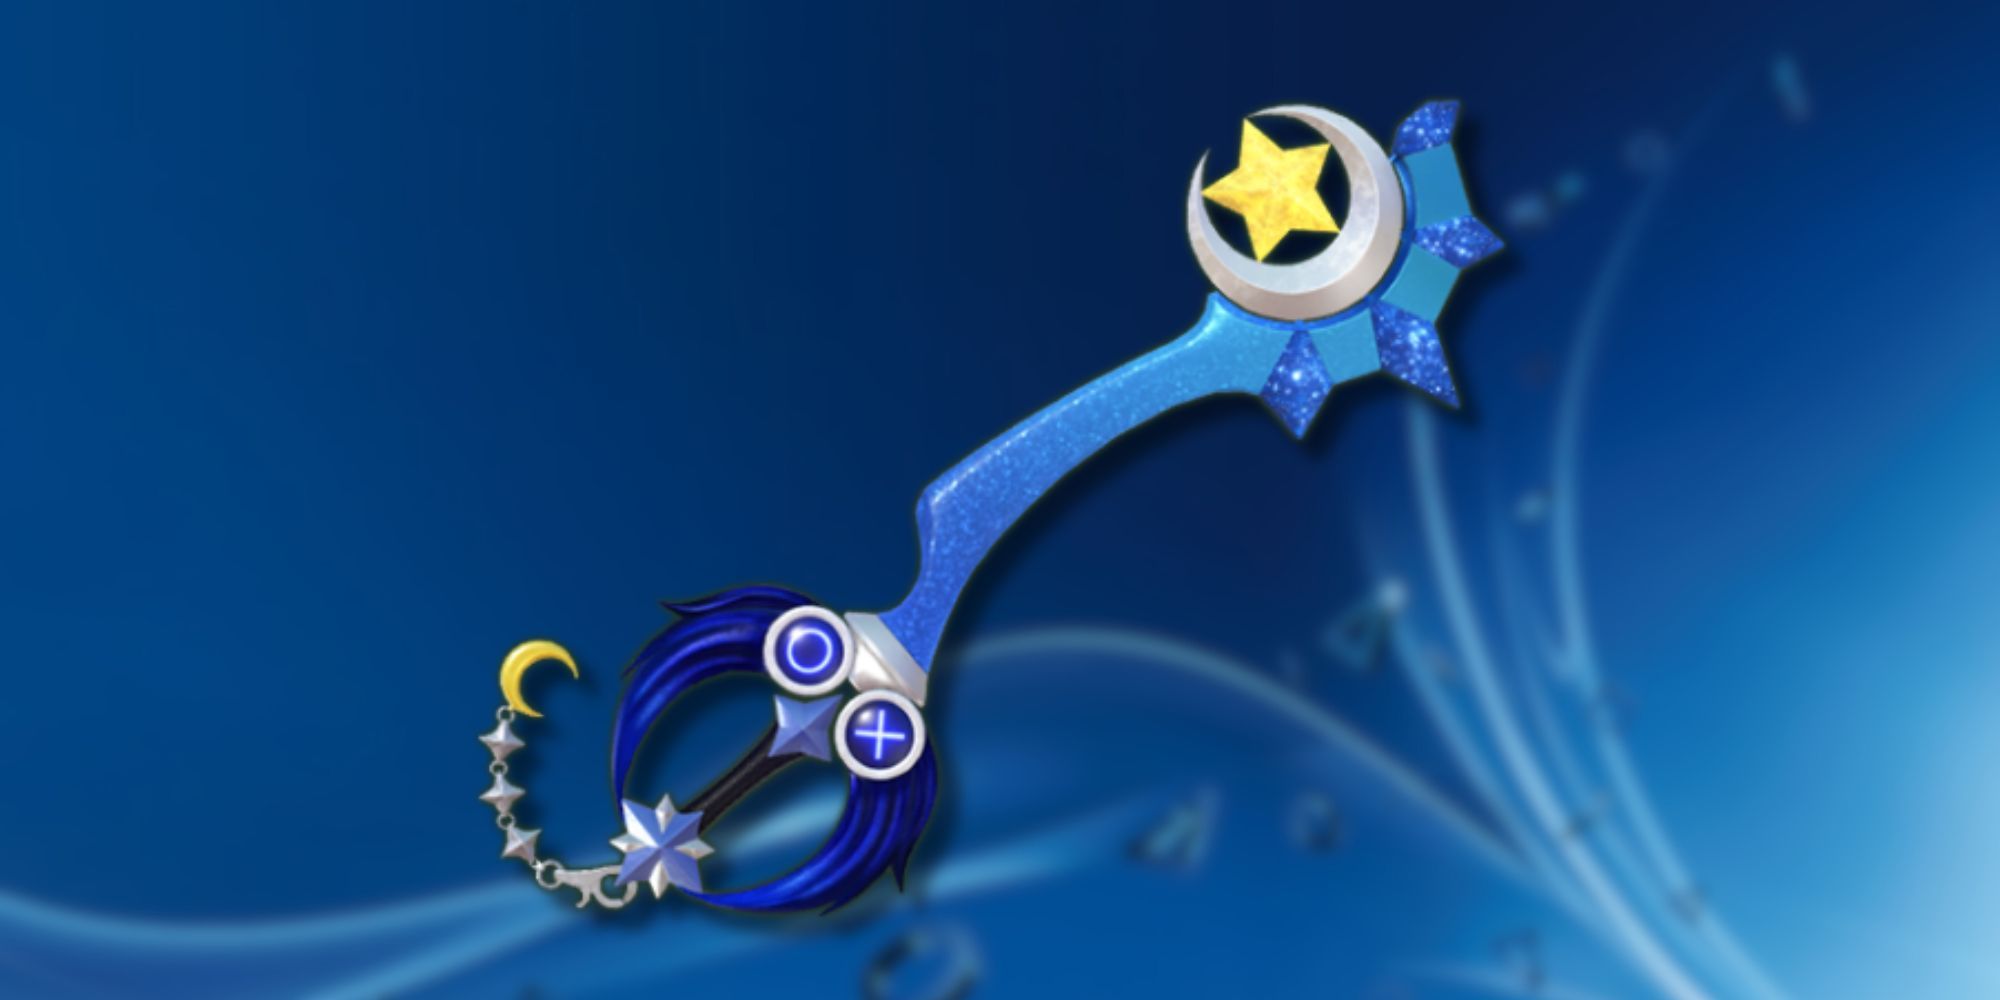 Midnight Blue, the PS4 Exclusive Keyblade.